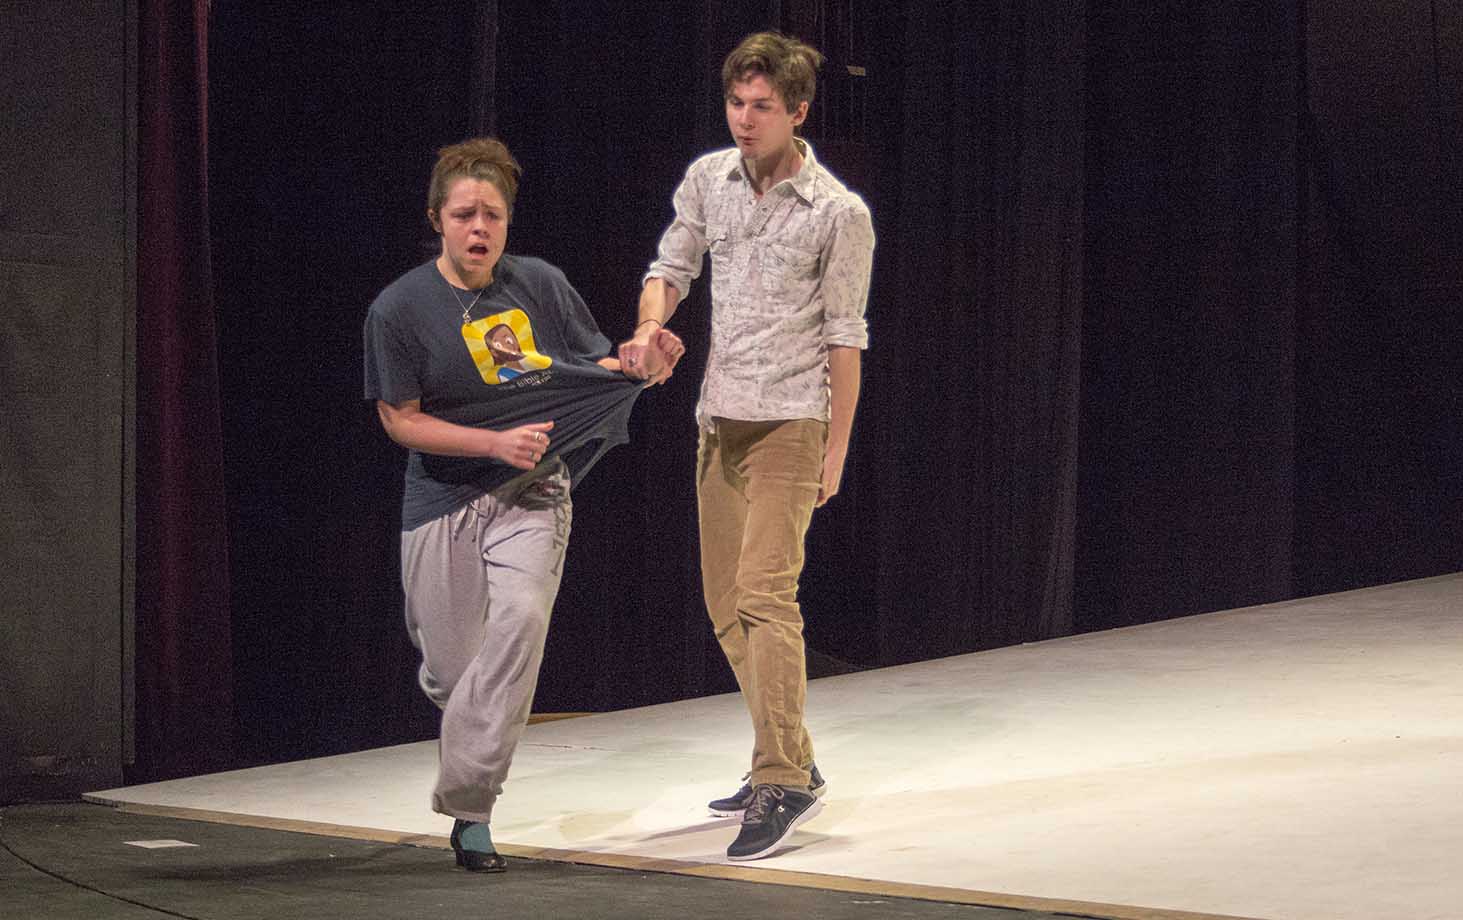 Ophelia, played by Caitlin Ferguson, runs from Hamlet, played by Jake Blakeman, during a rehearsal of Hamlet at the NE playhouse.